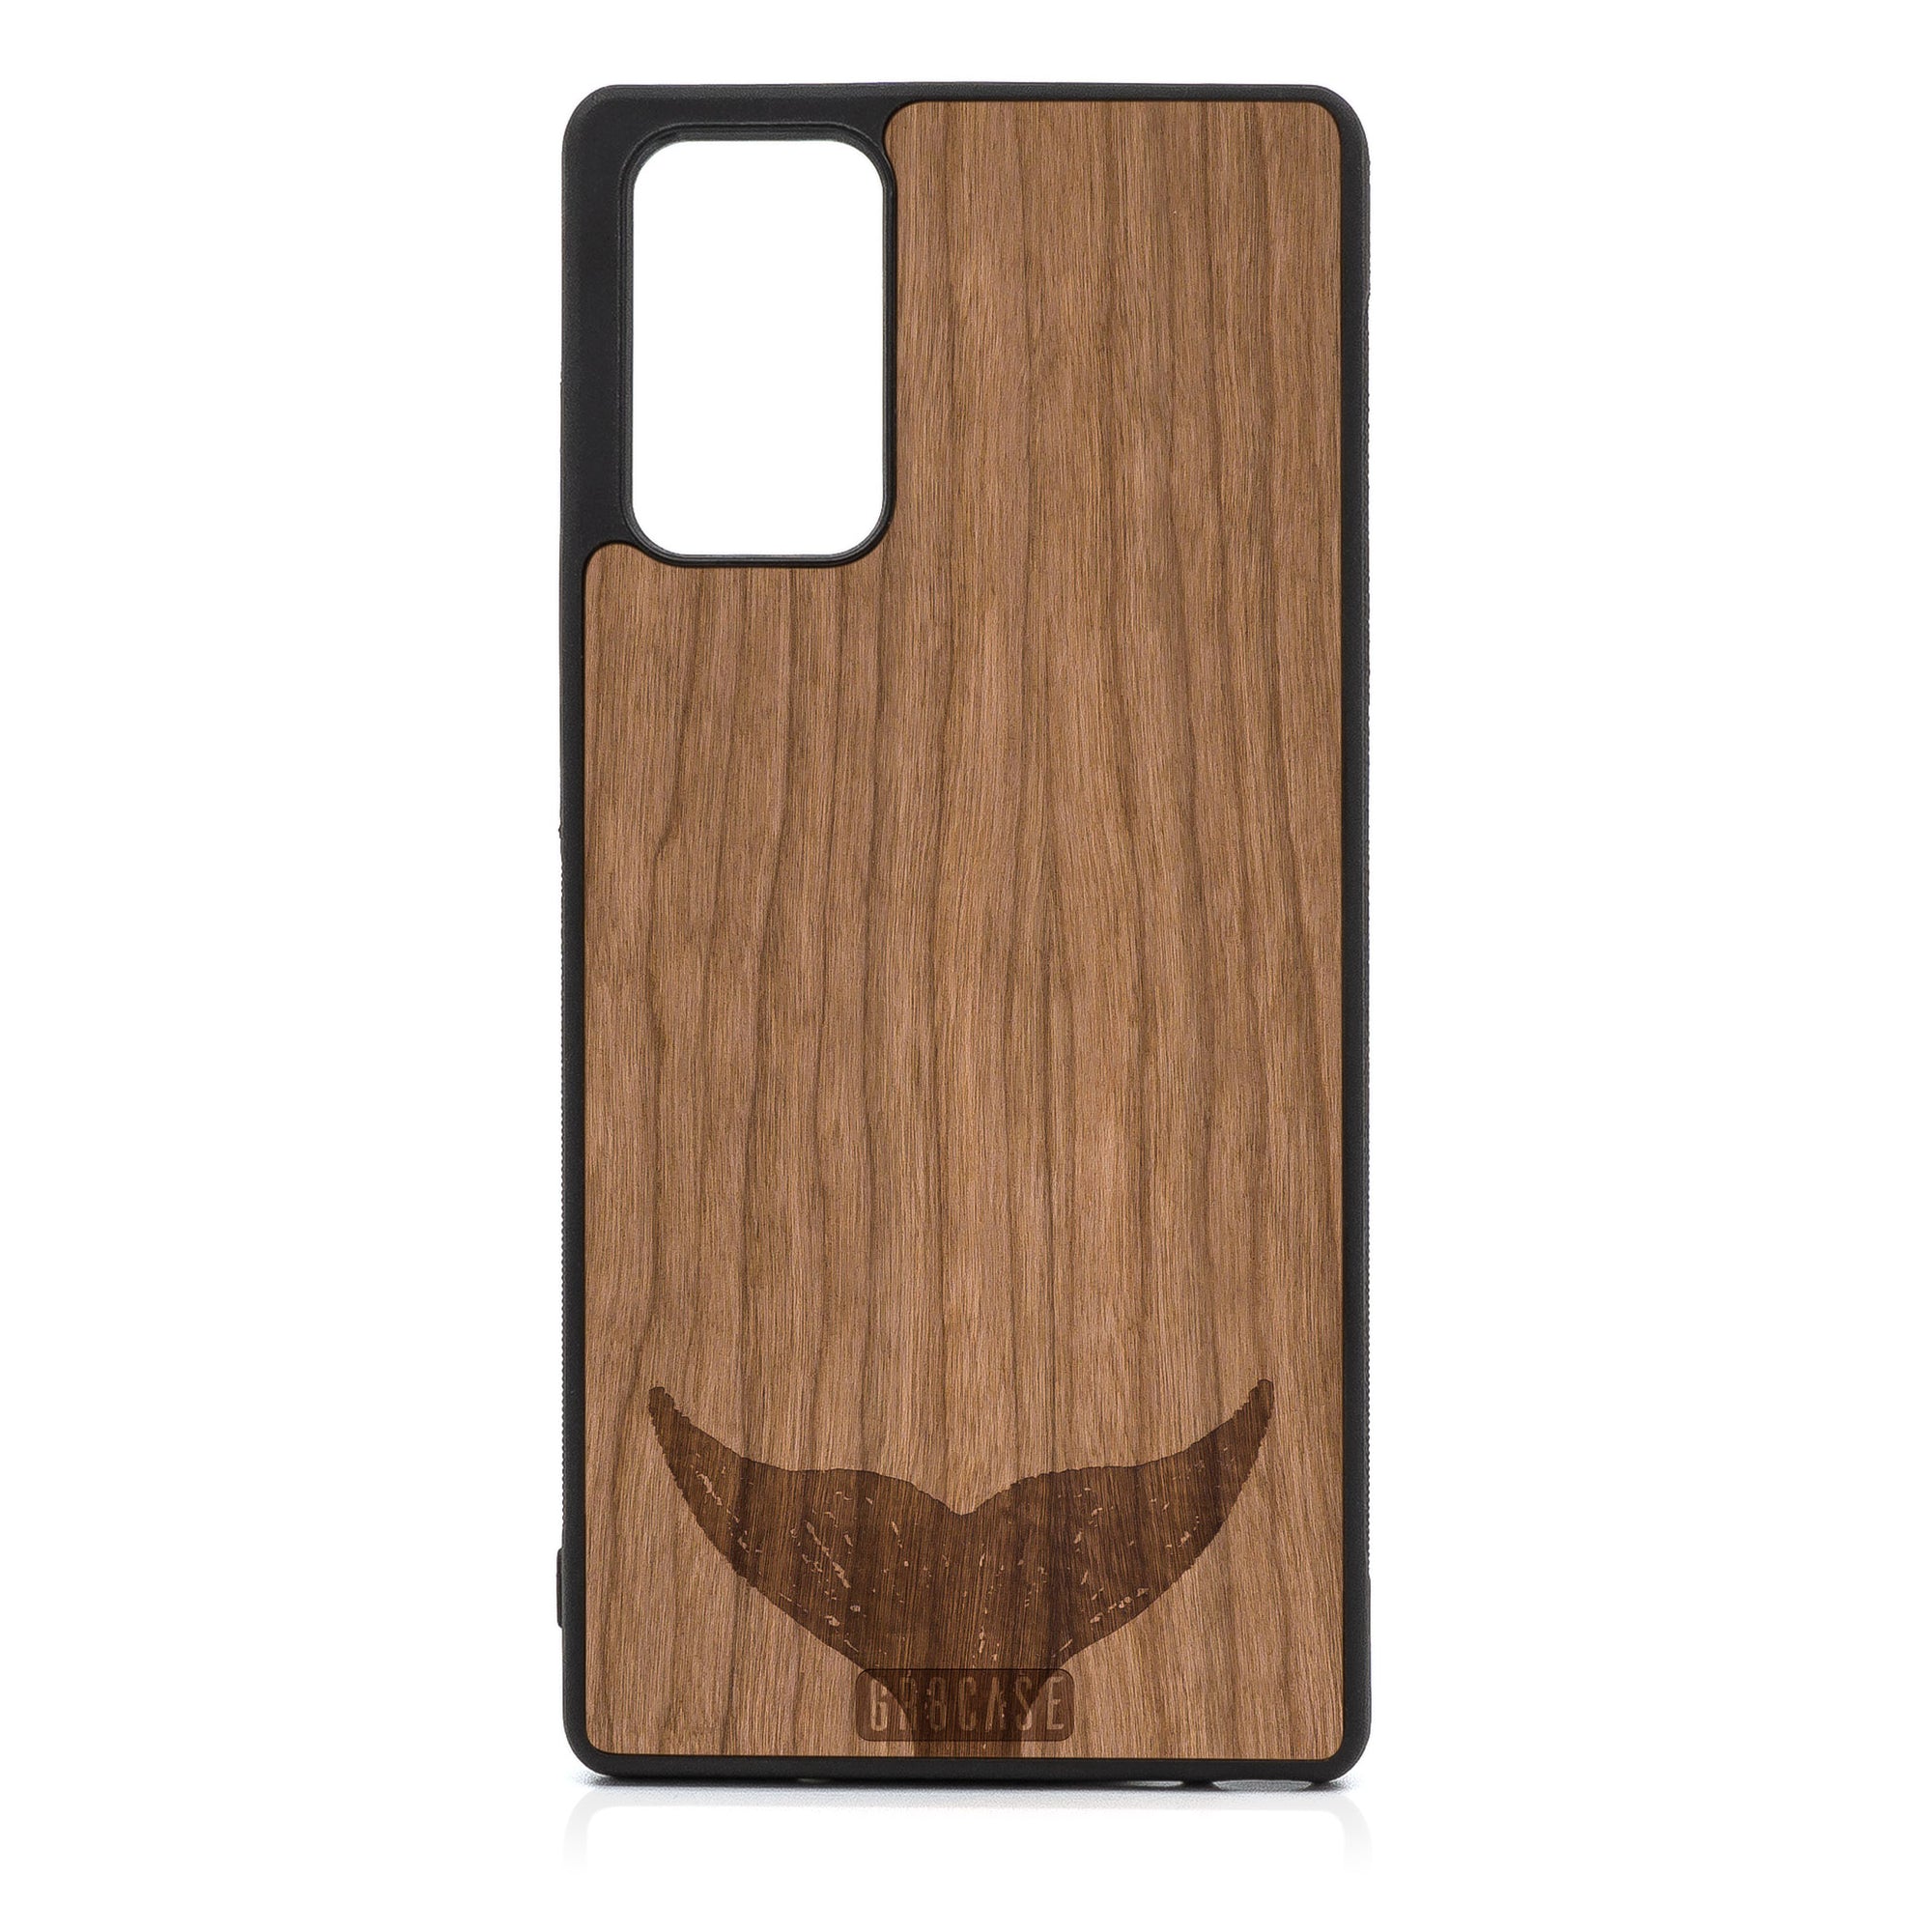 Whale Tail Design Wood Case For Samsung Galaxy Note 20